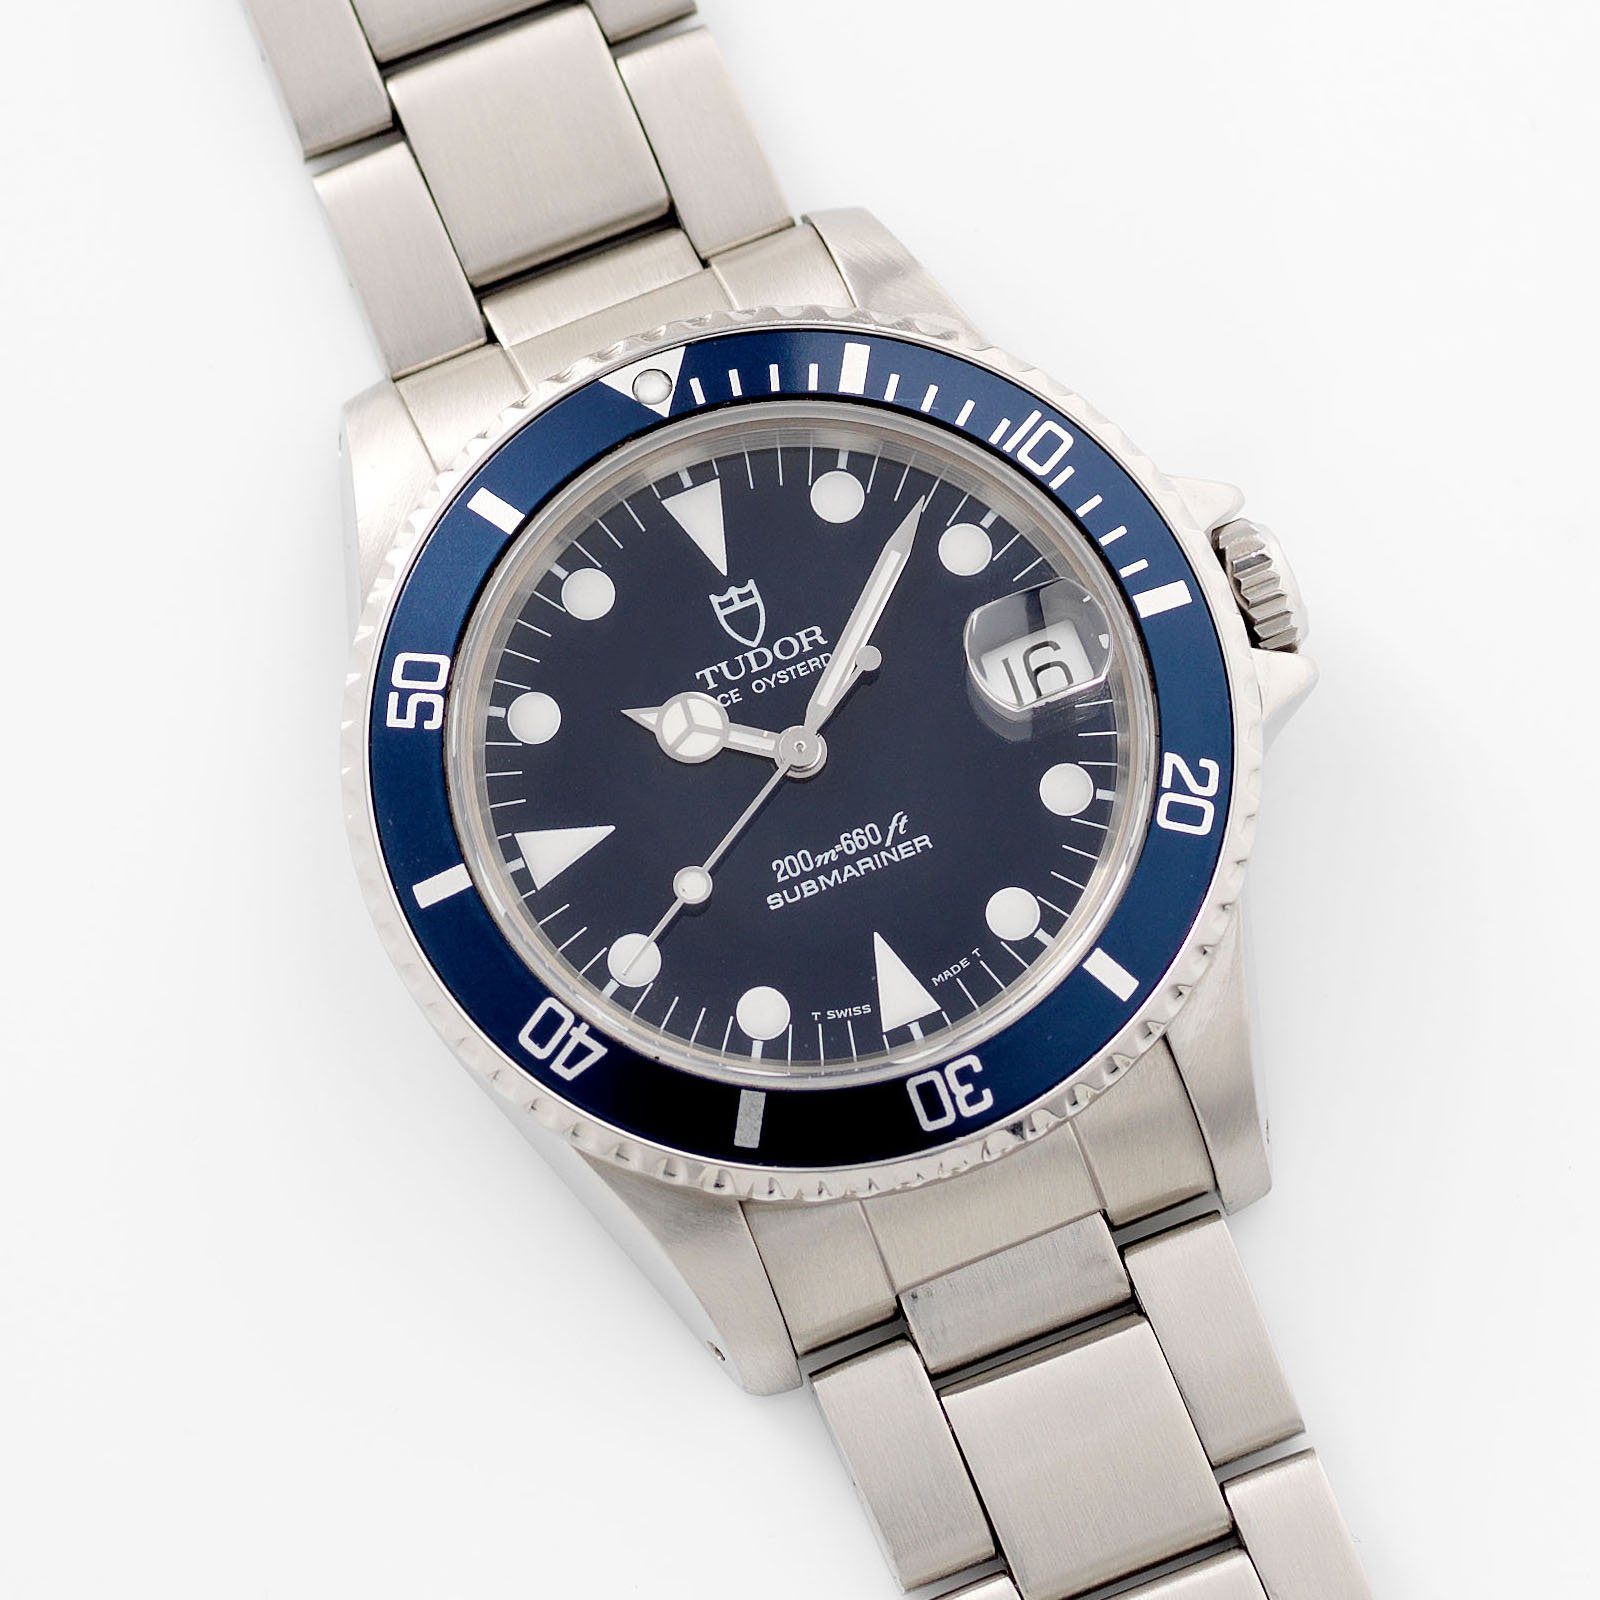 Tudor Submariners Package 79090 Black and 75090 Blue